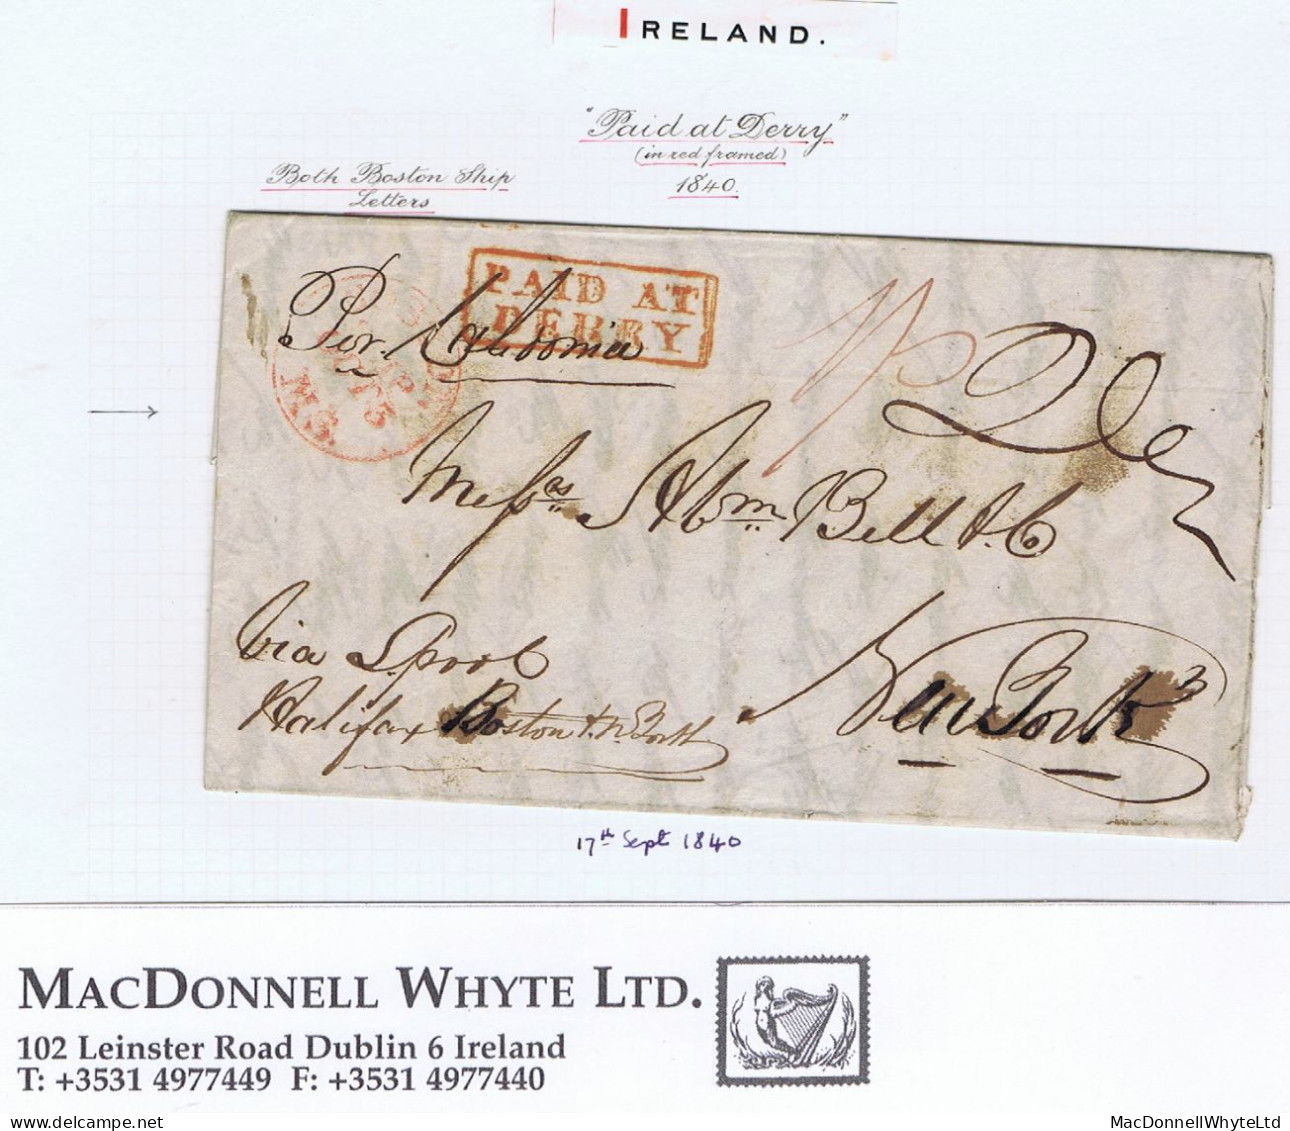 Ireland Derry TransatlanticUS 1840 Letter Londonderry To New York Paid "1/-" With Boxed PAID AT/DERRY In Red BOSTON/SHIP - Prephilately